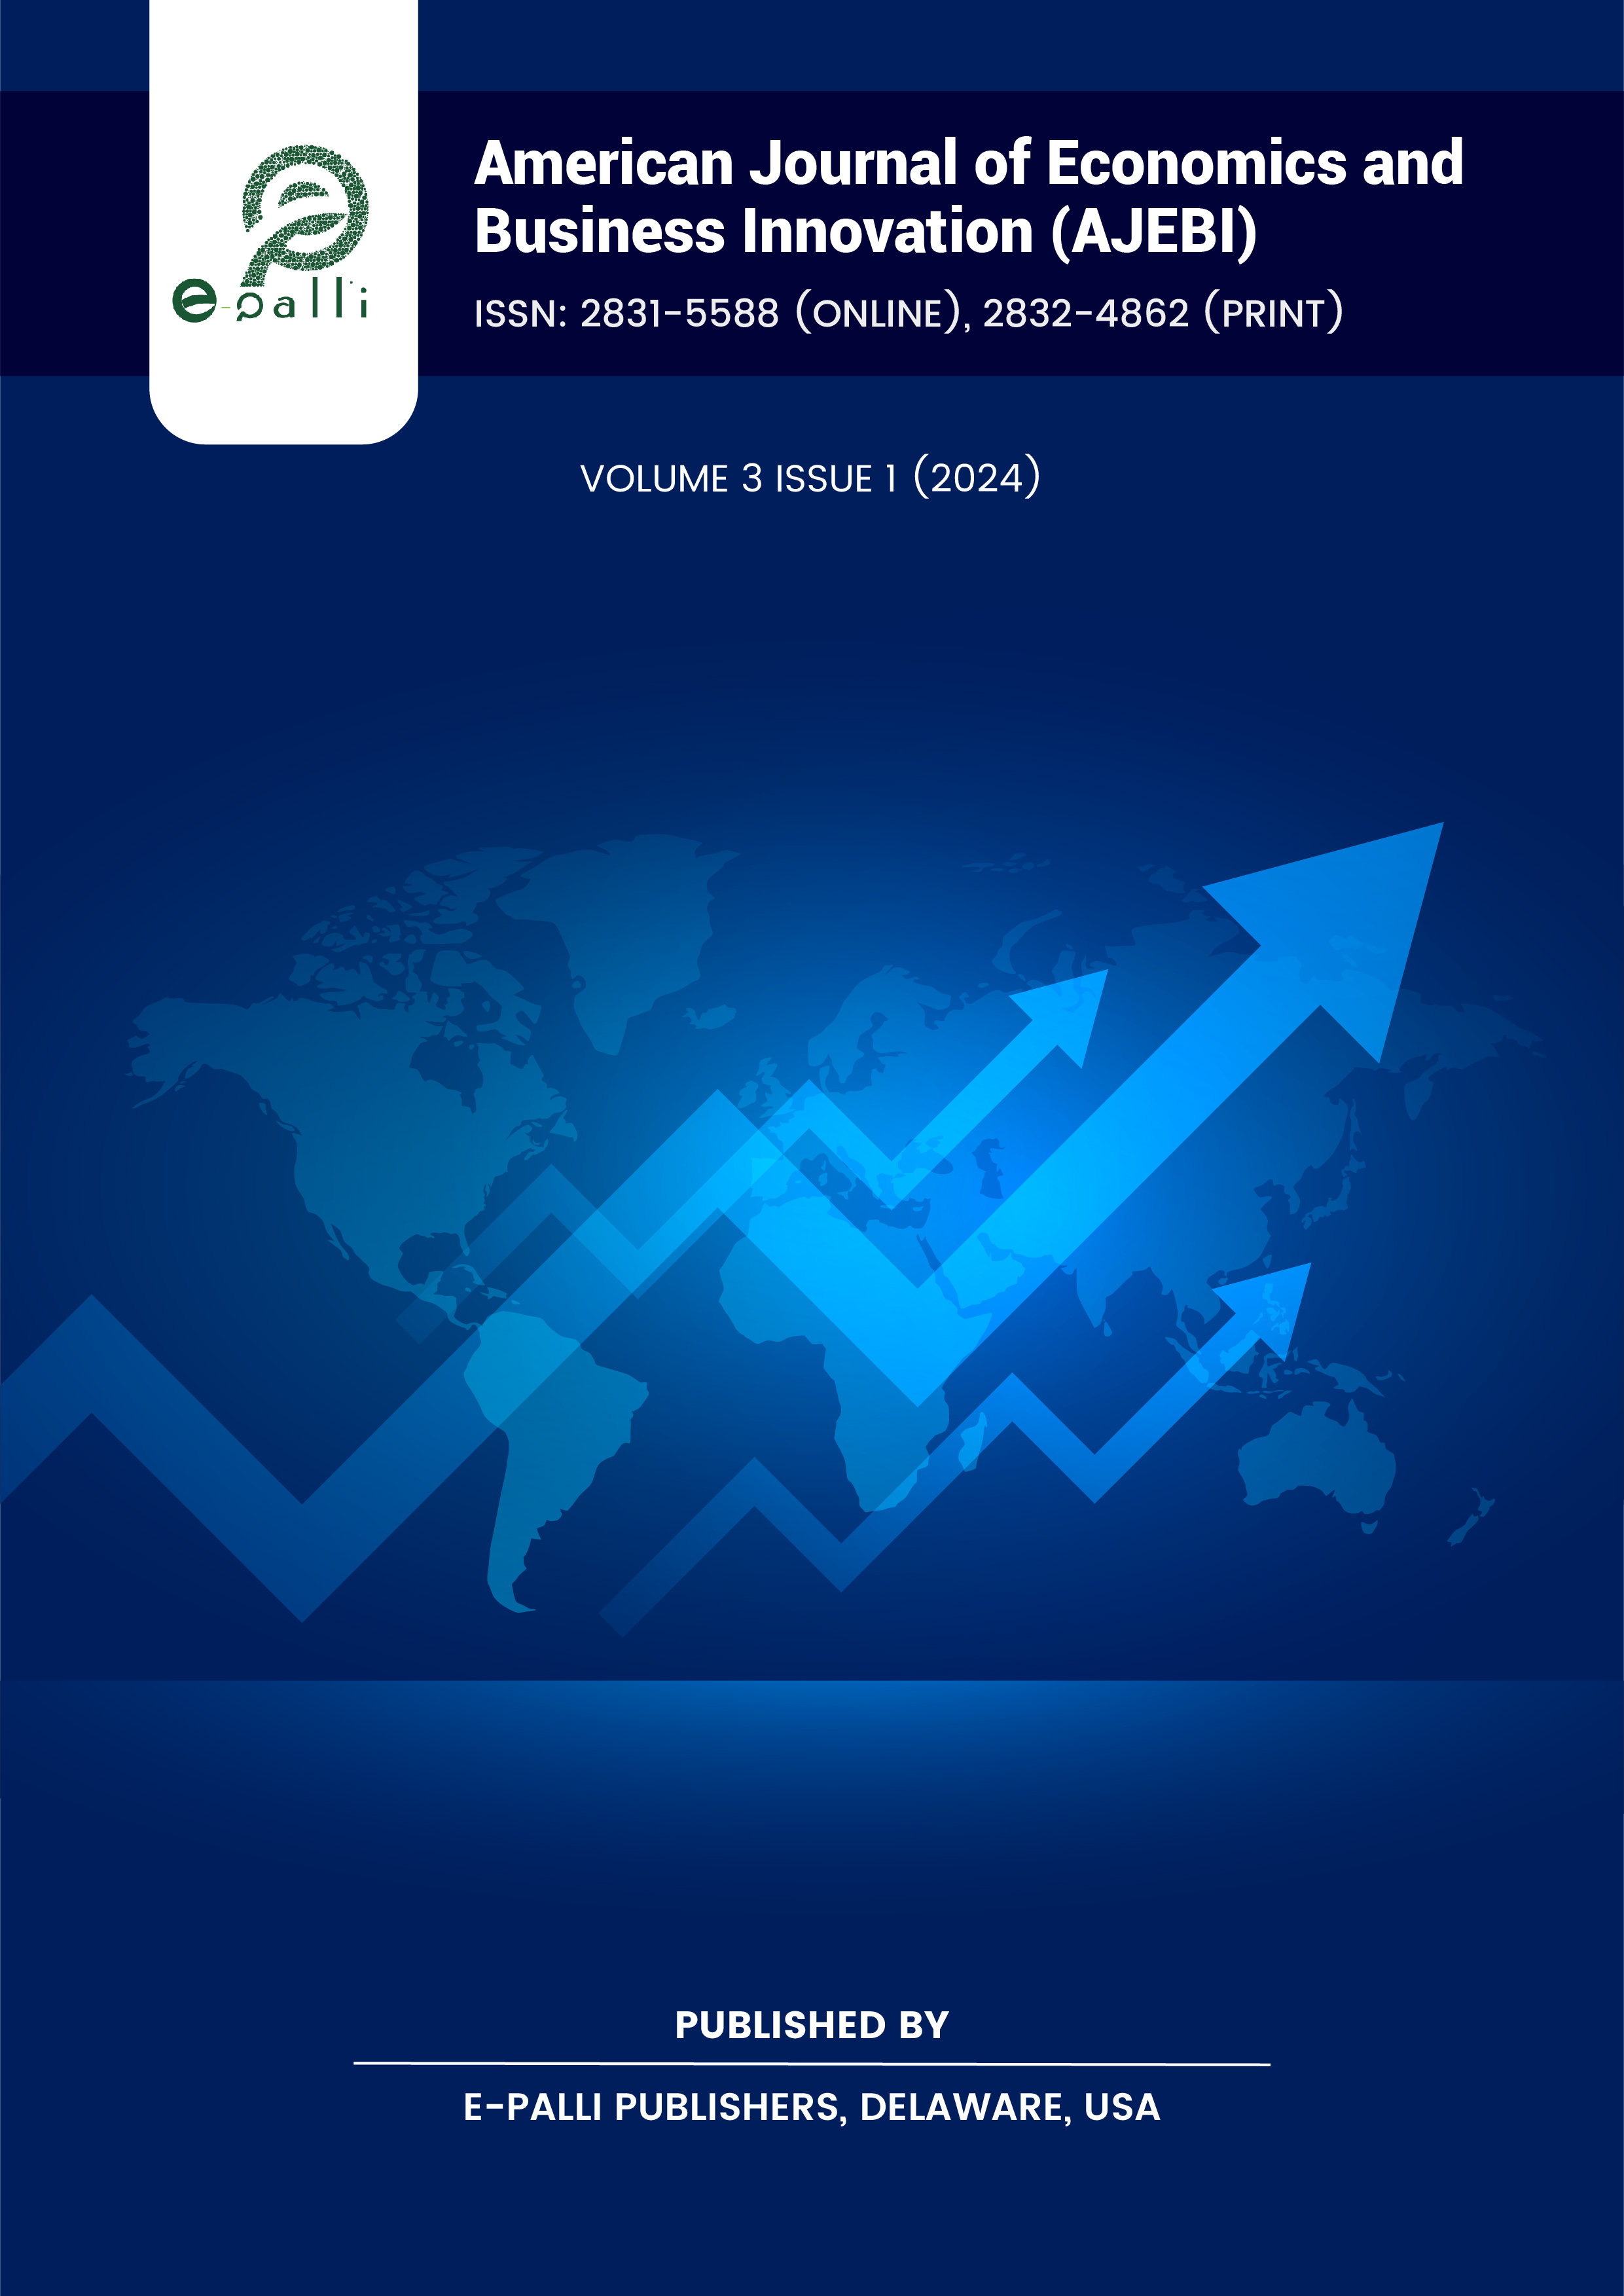                     View Vol. 3 No. 1 (2024): American Journal of Economics and Business Innovation
                